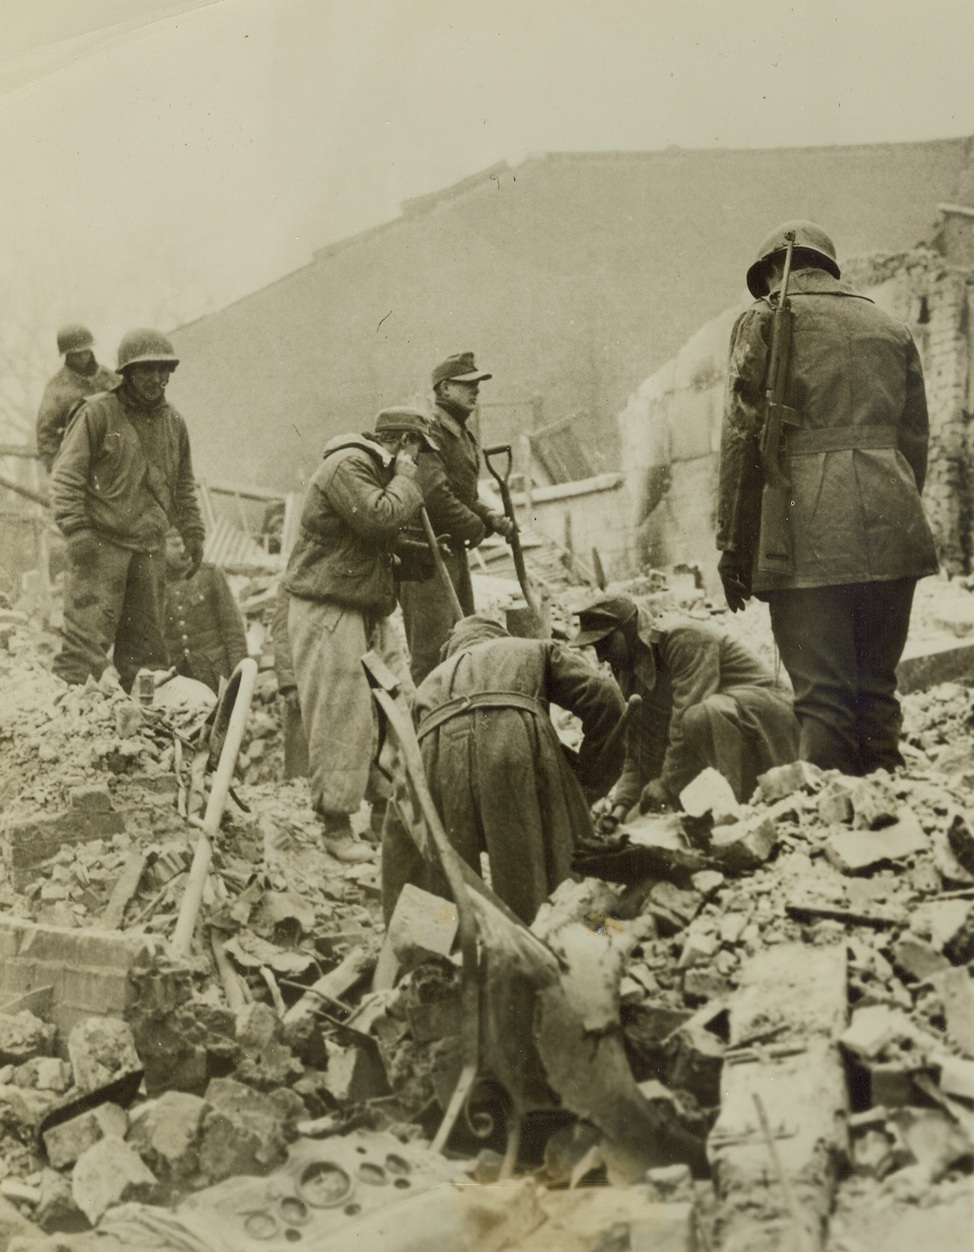 REPAIRING THE DAMAGE THEY WROUGHT, 1/8/1945. BASTOGNE, BELGIUM—Captured when Gen. Patton’s men came to relieve the besieged city of Bastogne, these German prisoners are put to work clearing away the debris wrought by their own bombs and shells. Yank soldiers oversee the job. Credit: Acme;